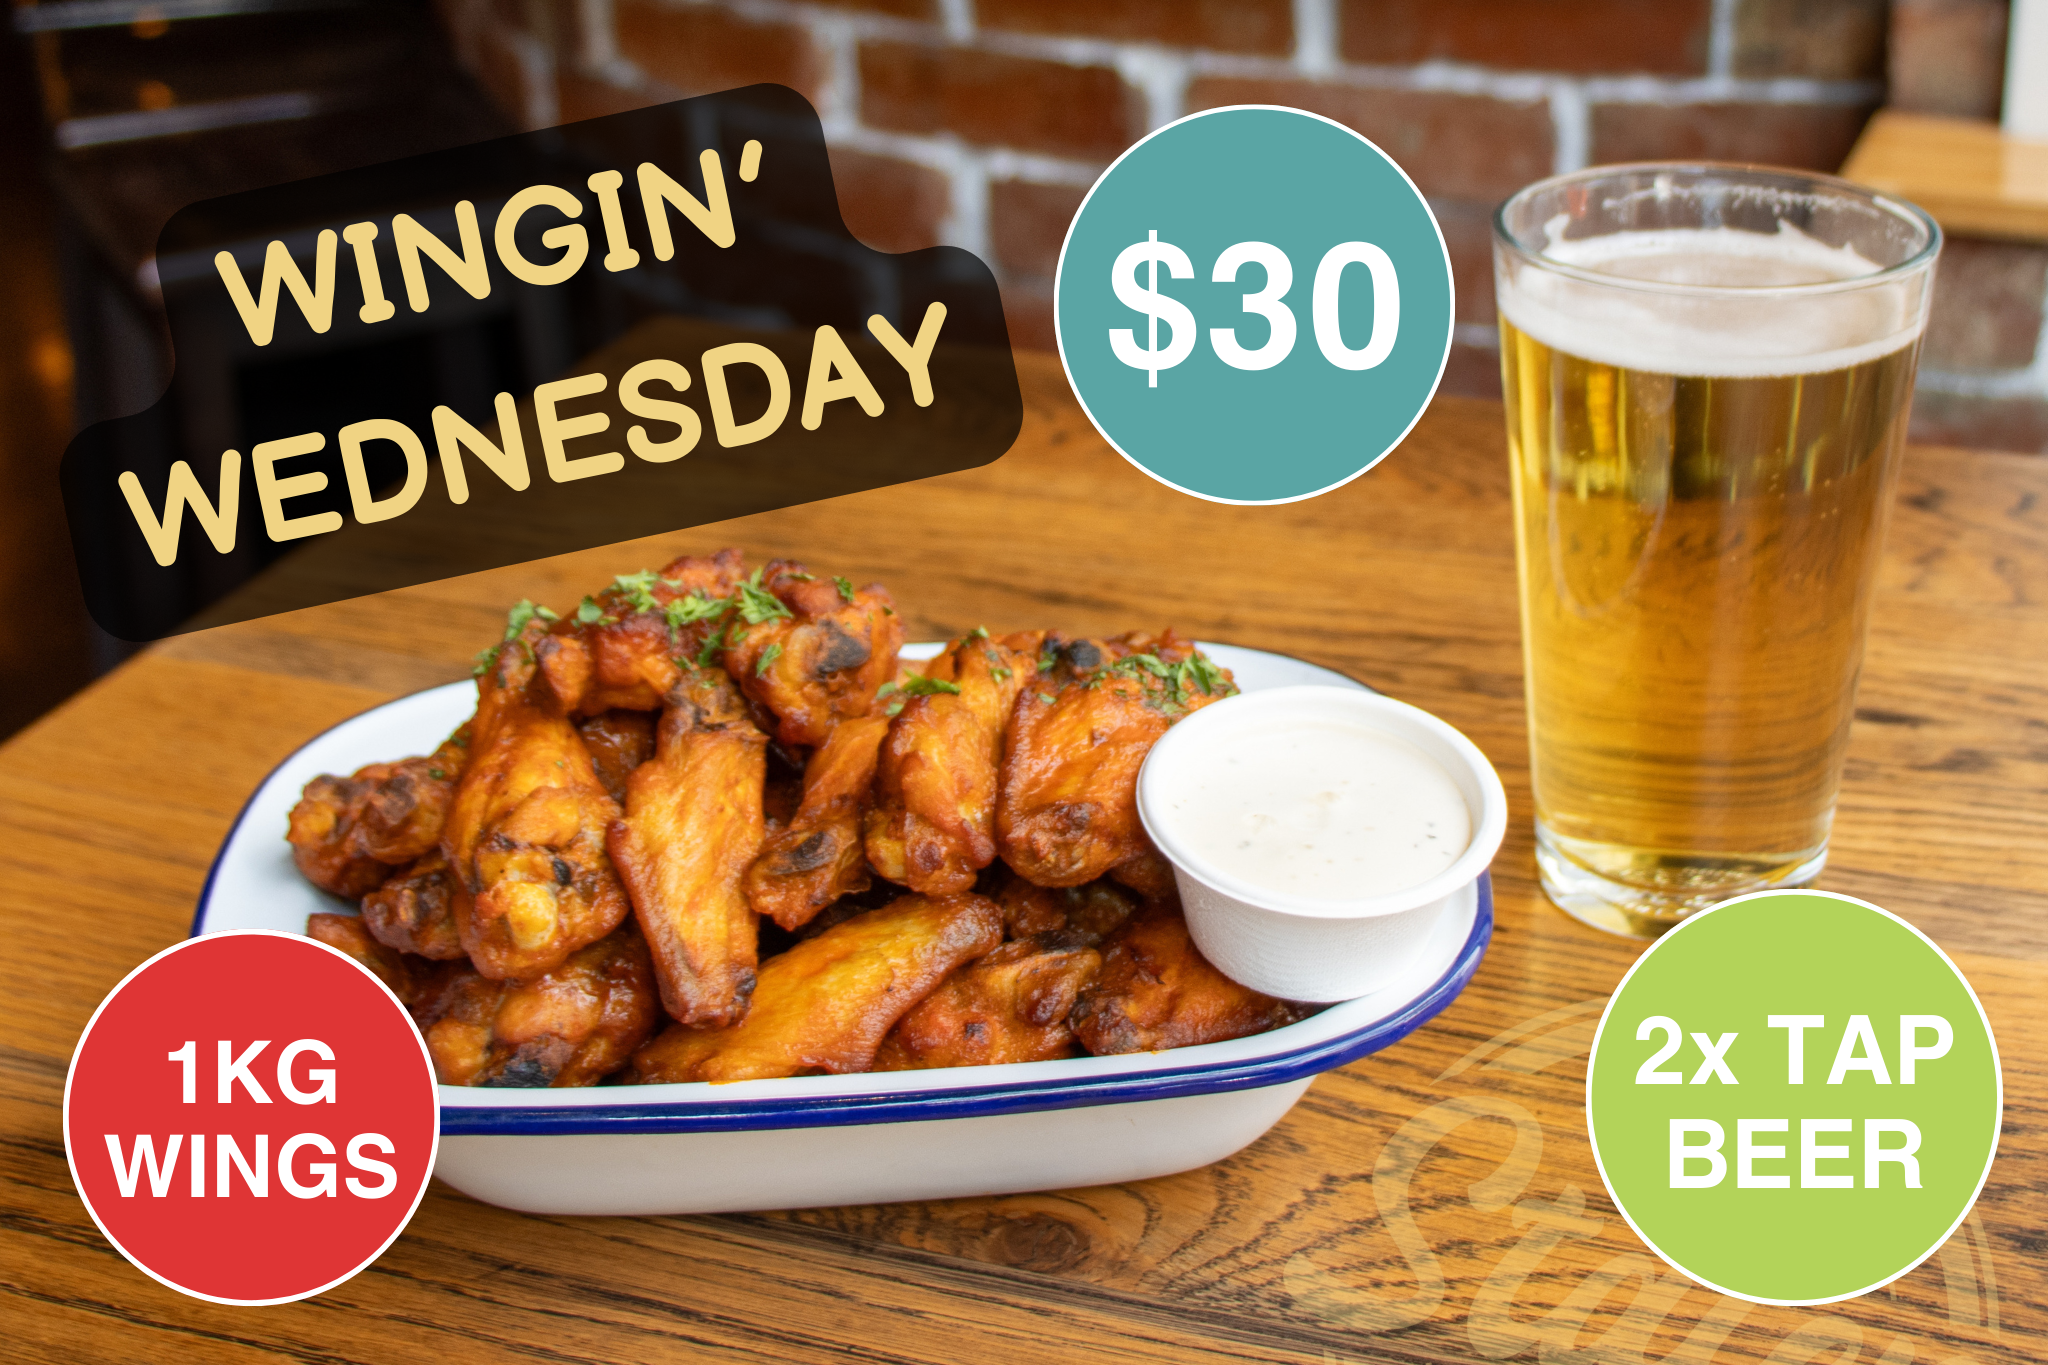 Wingin' Wednesday at The Staten Eatery, 1kg of wings and 2 tap beers for $30